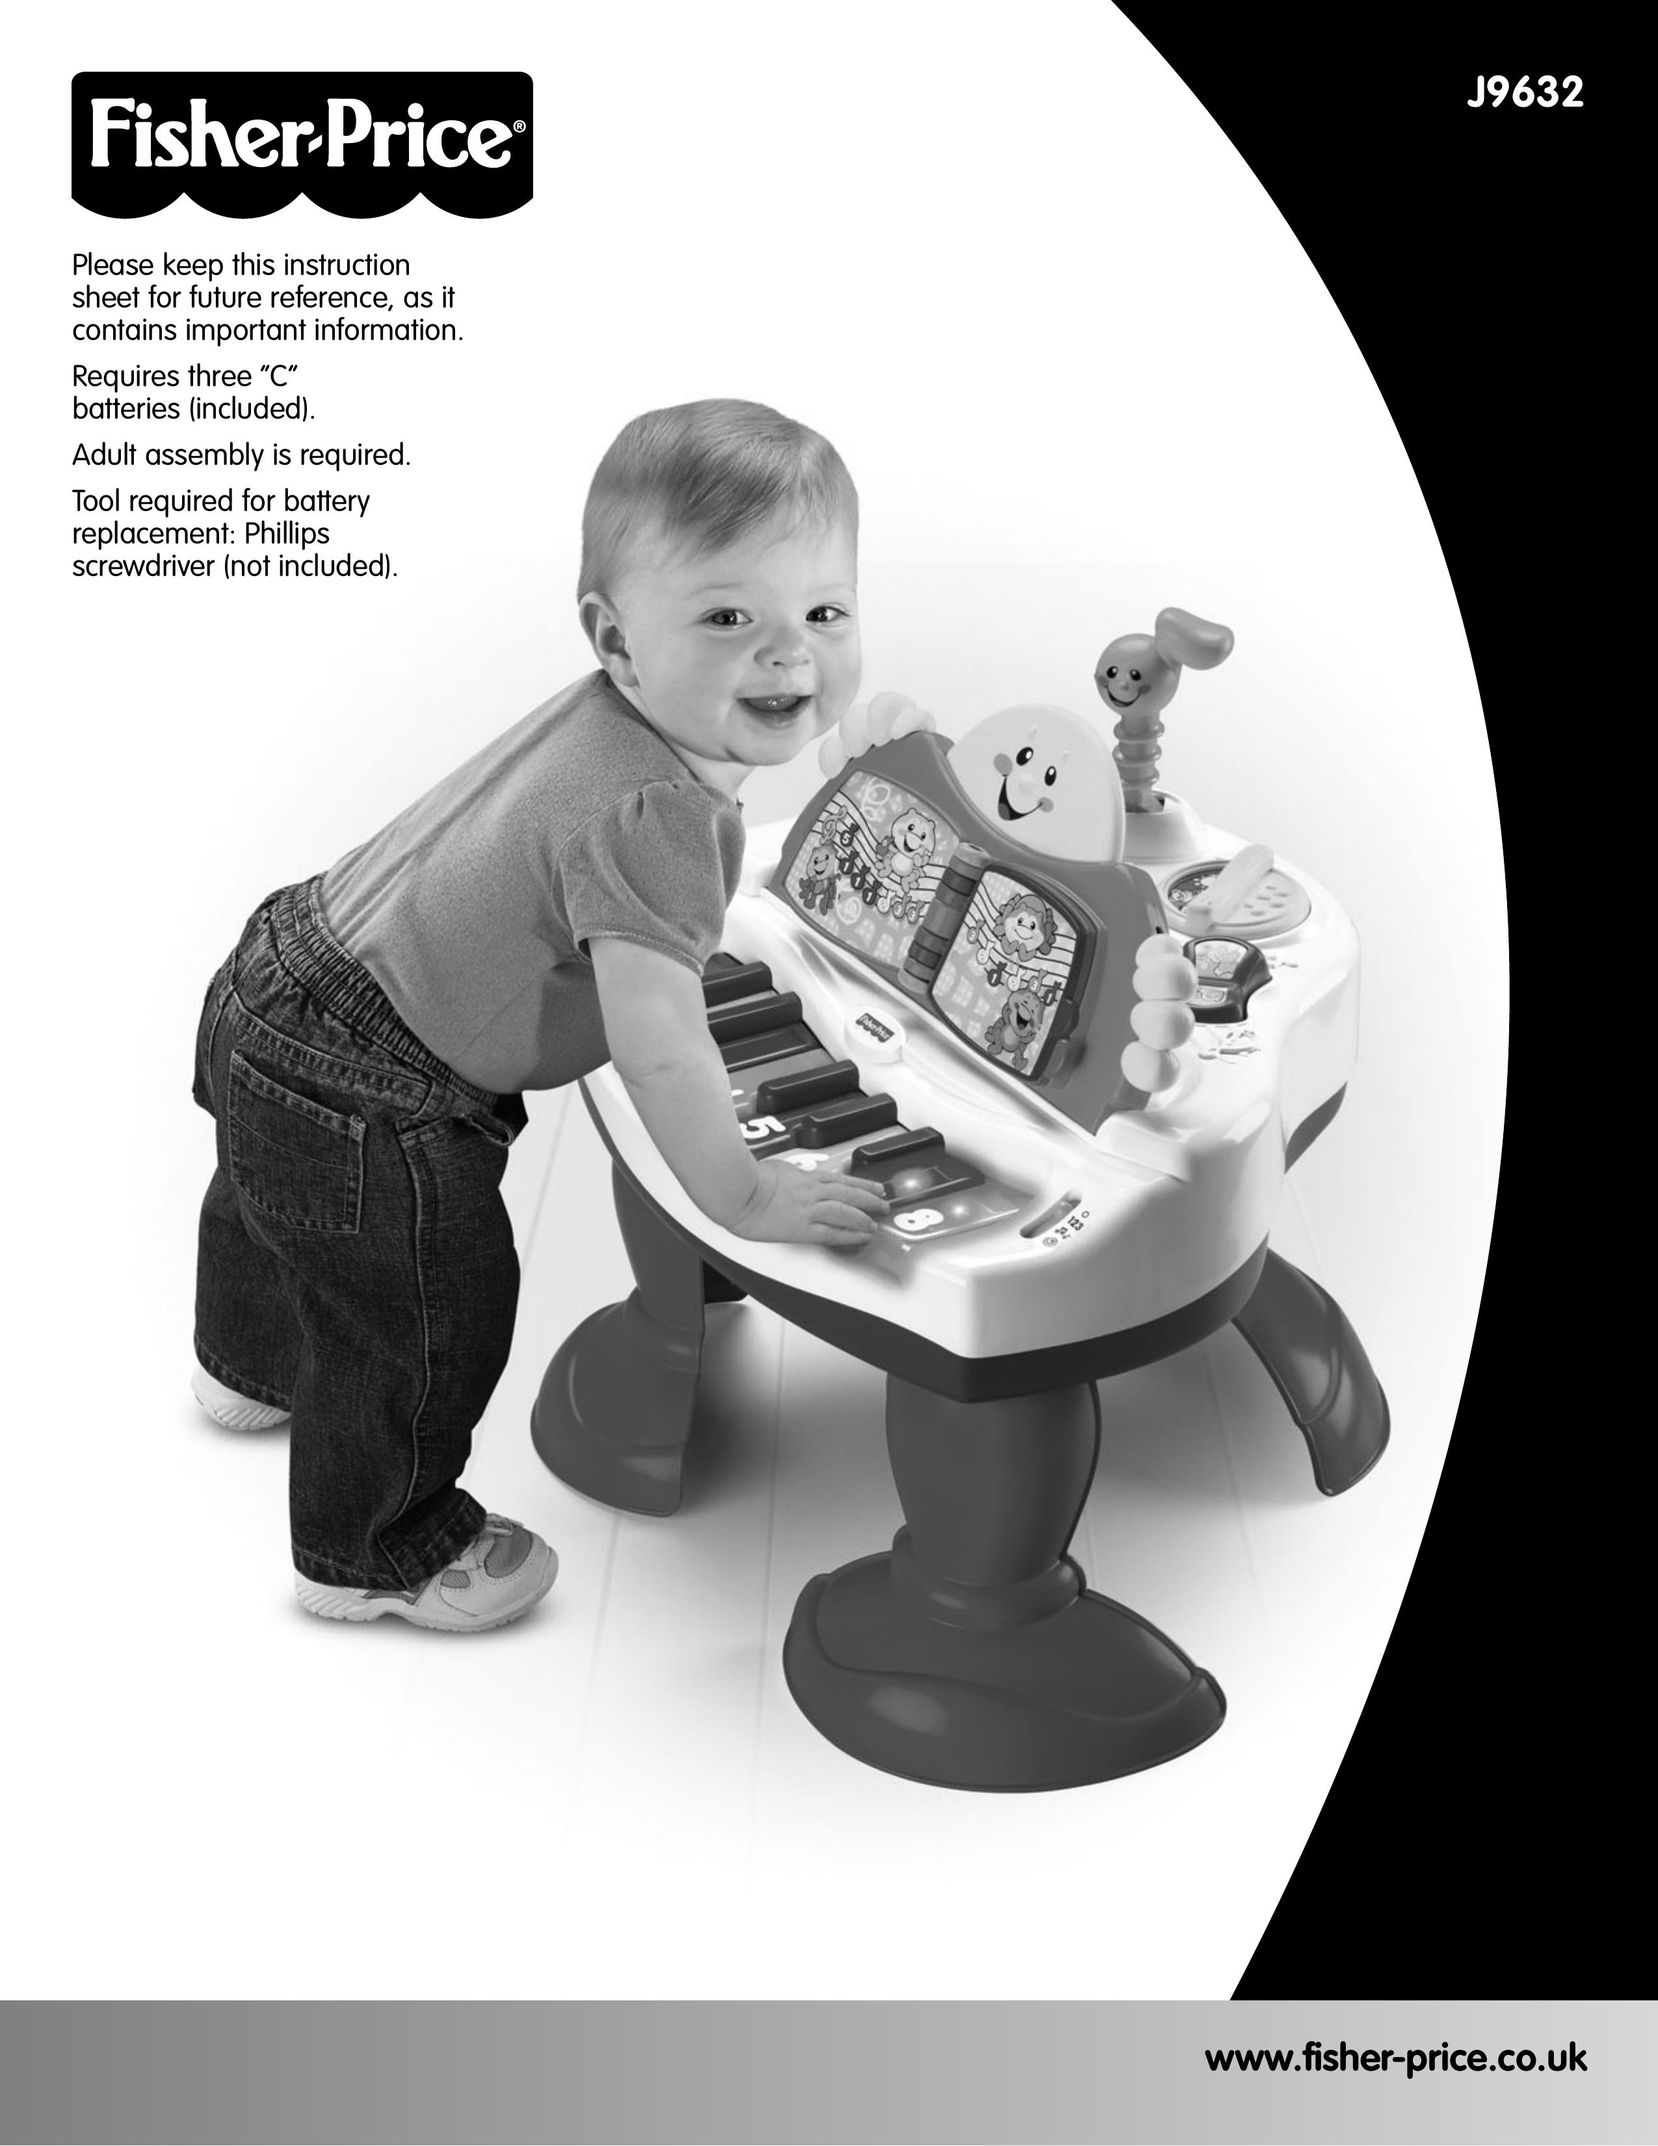 Fisher-Price J9632 Musical Toy Instrument User Manual